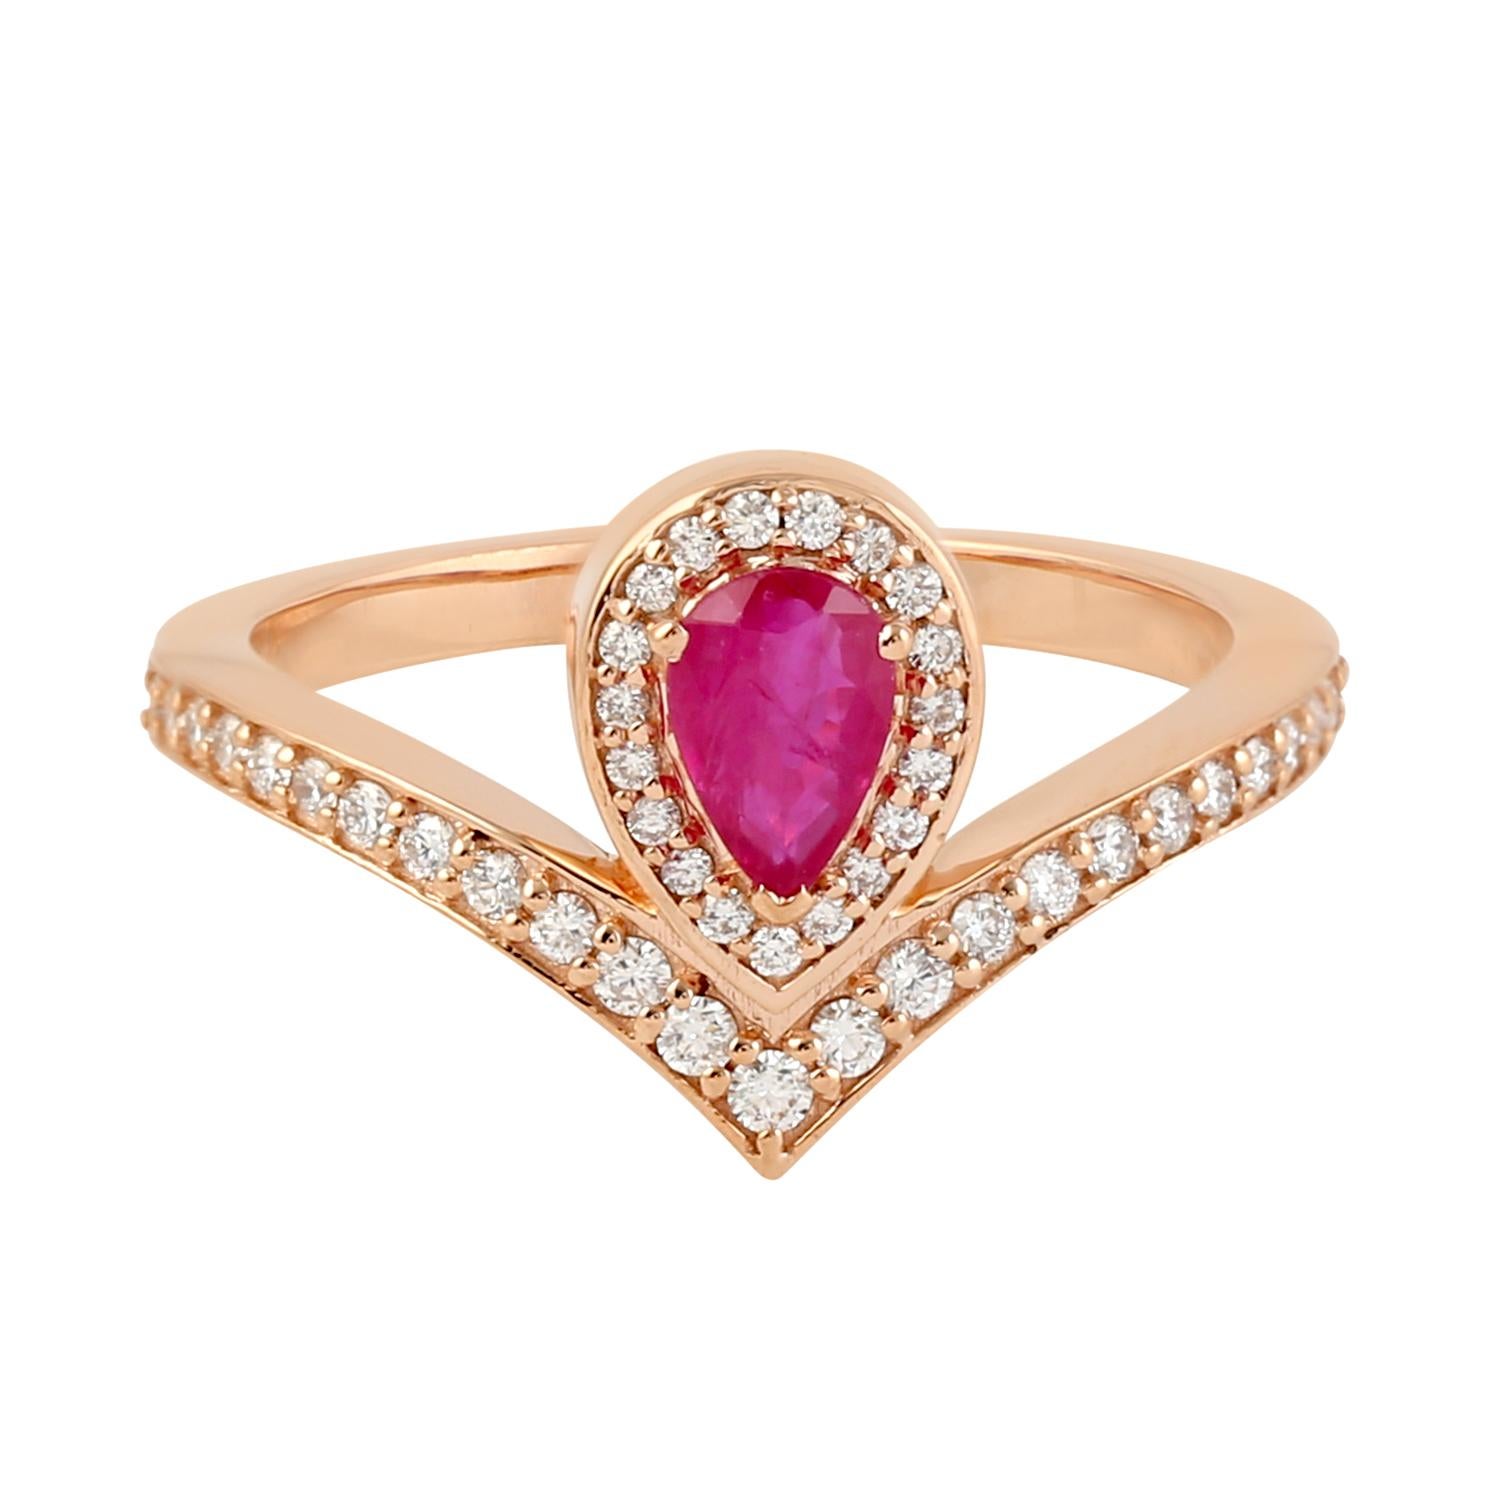 Pear Shaped Ruby Ring Accented With Diamonds Made In 18k Rose Gold In New Condition For Sale In New York, NY